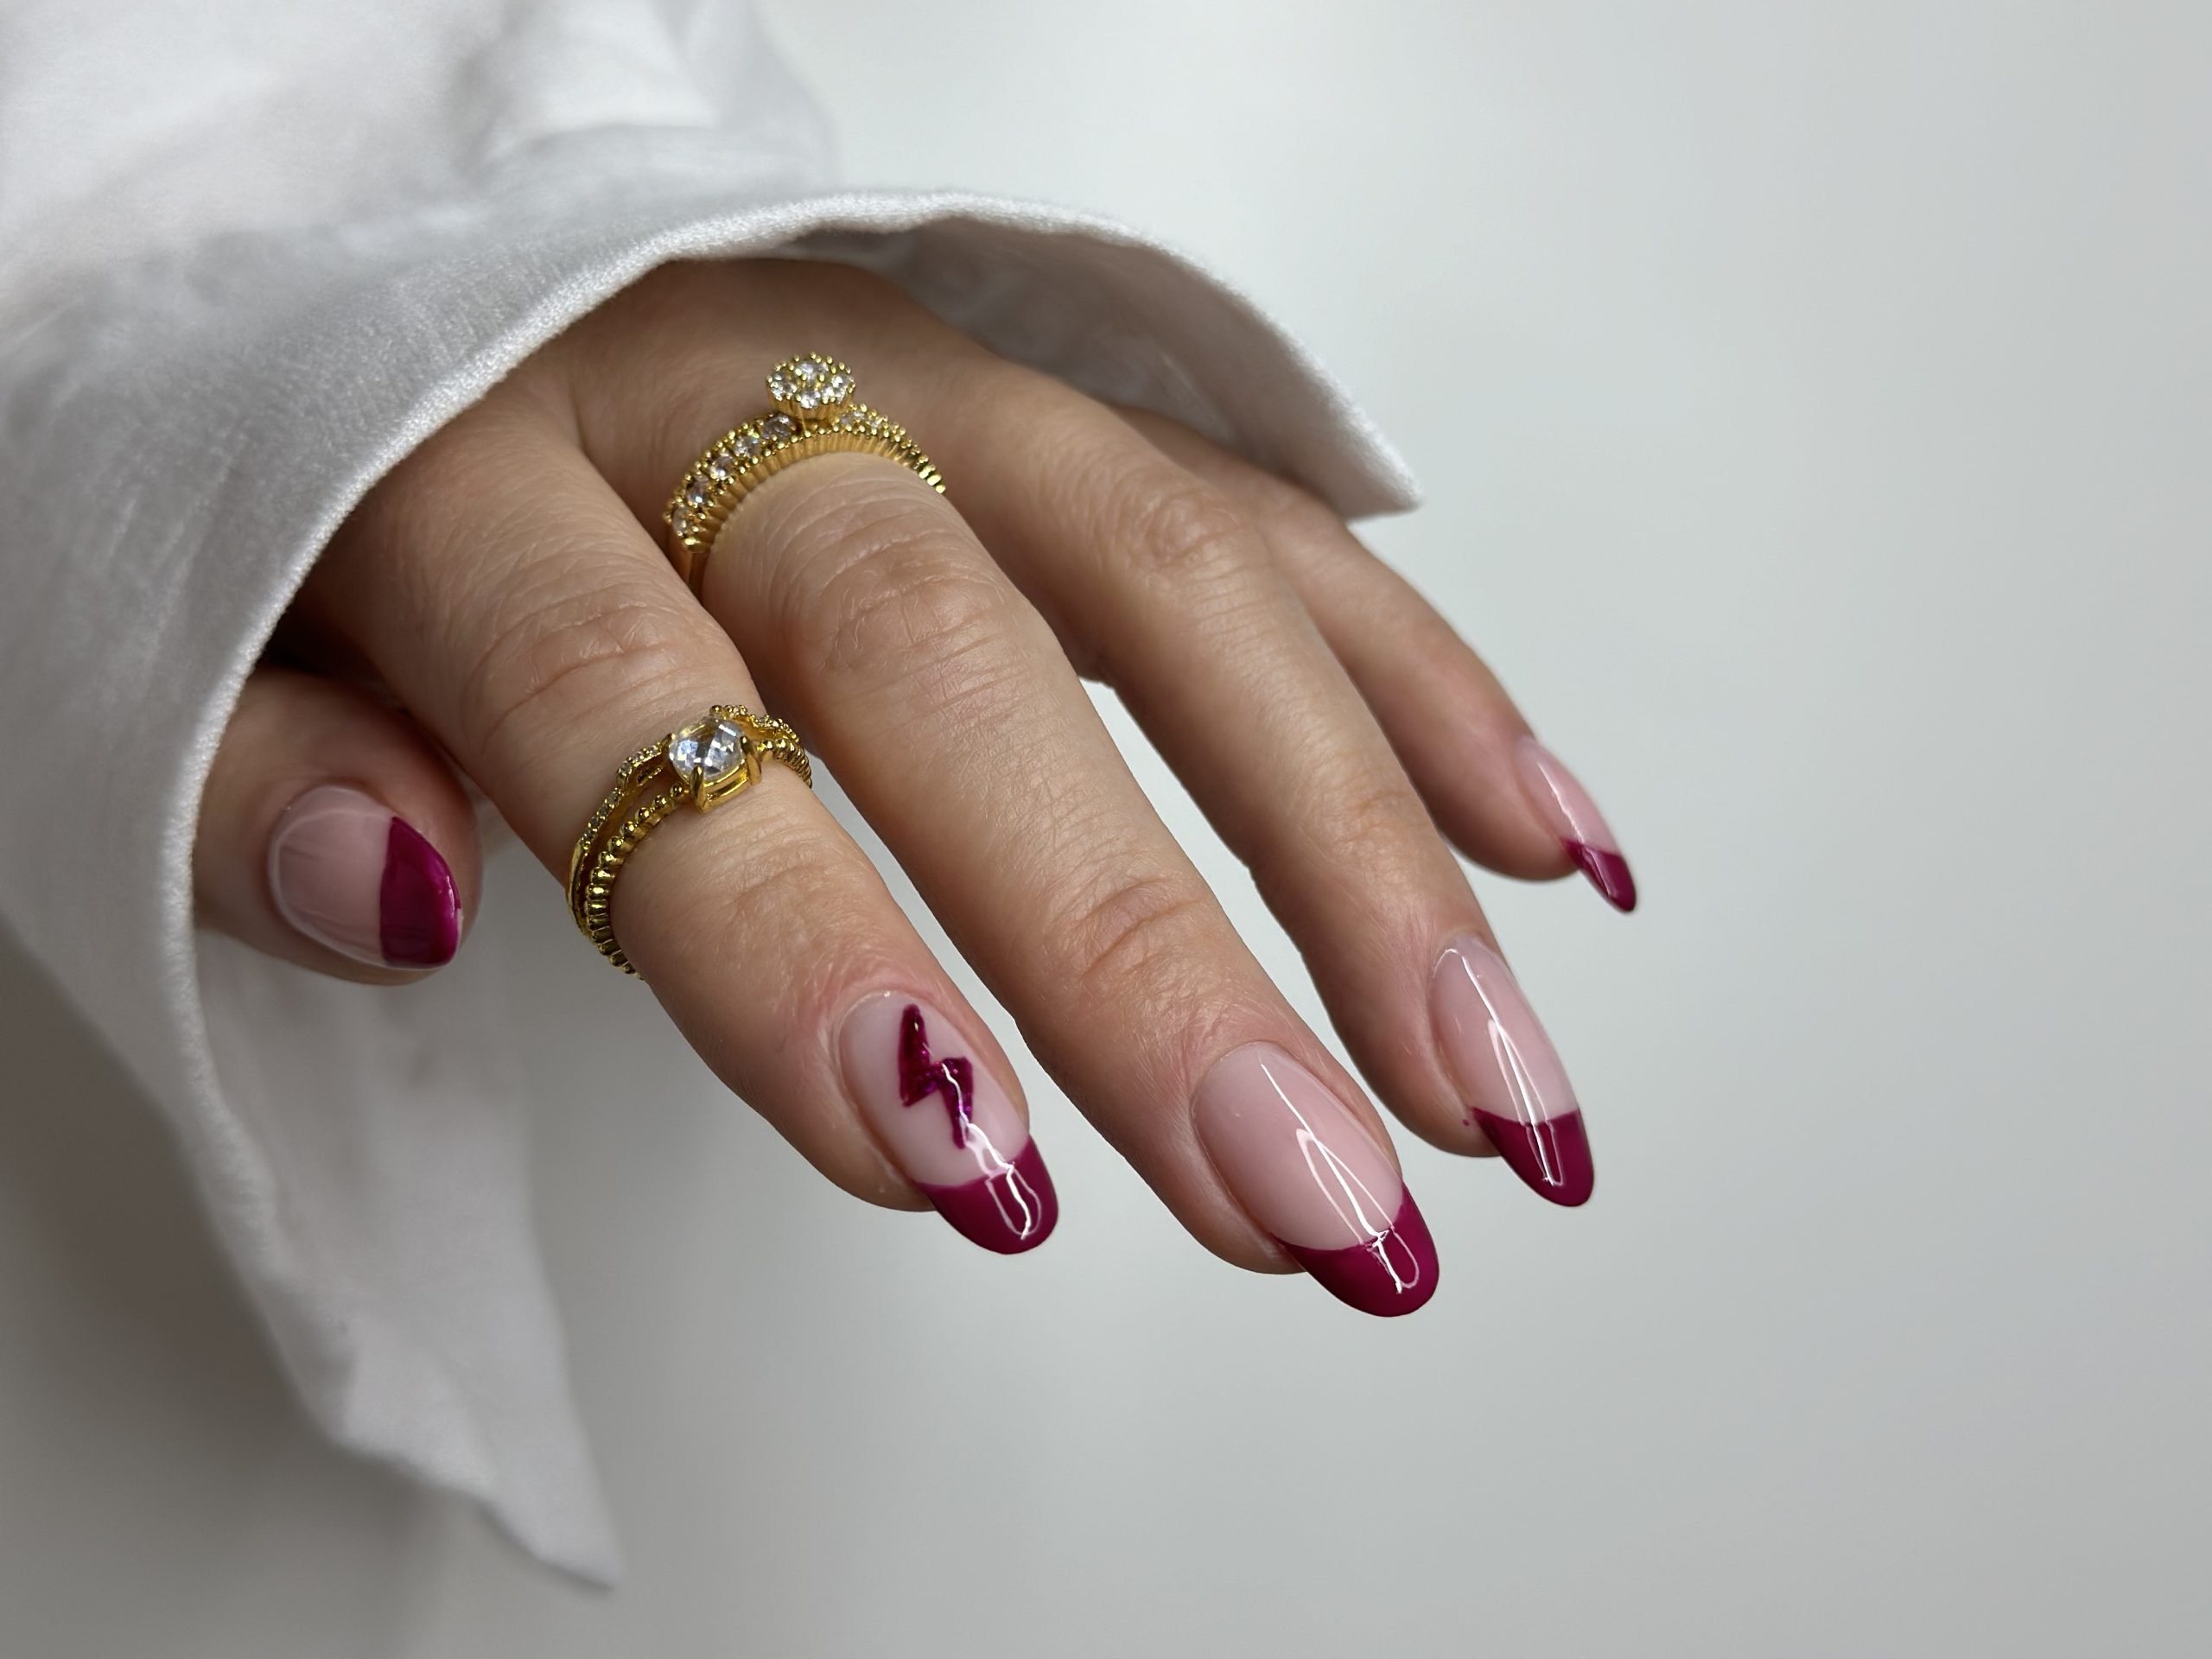 The Vanilla Chrome Manicure Is Summer's Hottest Nail Trend | Vogue